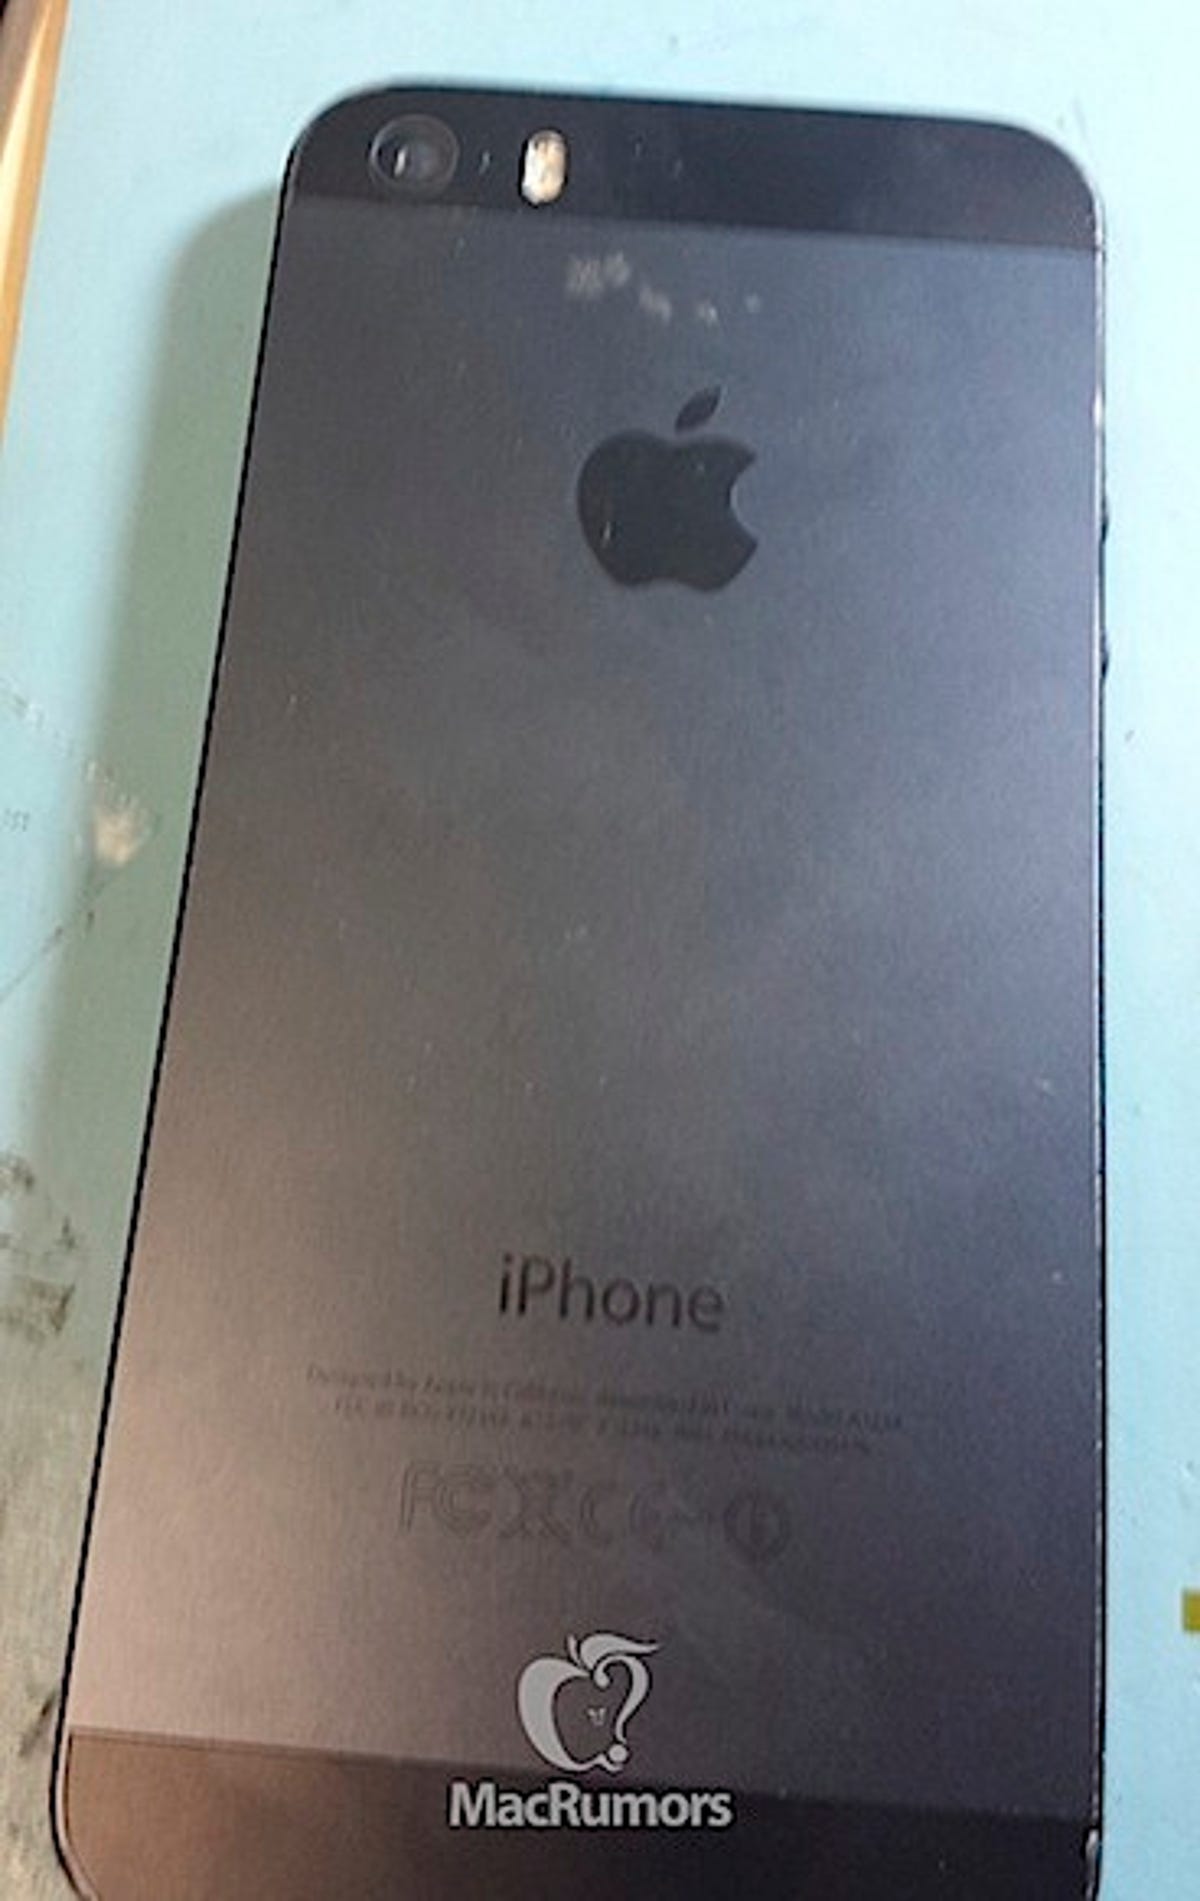 MacRumors claims this is a photo of the iPhone 5S' rear shell, which makes room for a larger, dual-LED flash at top.